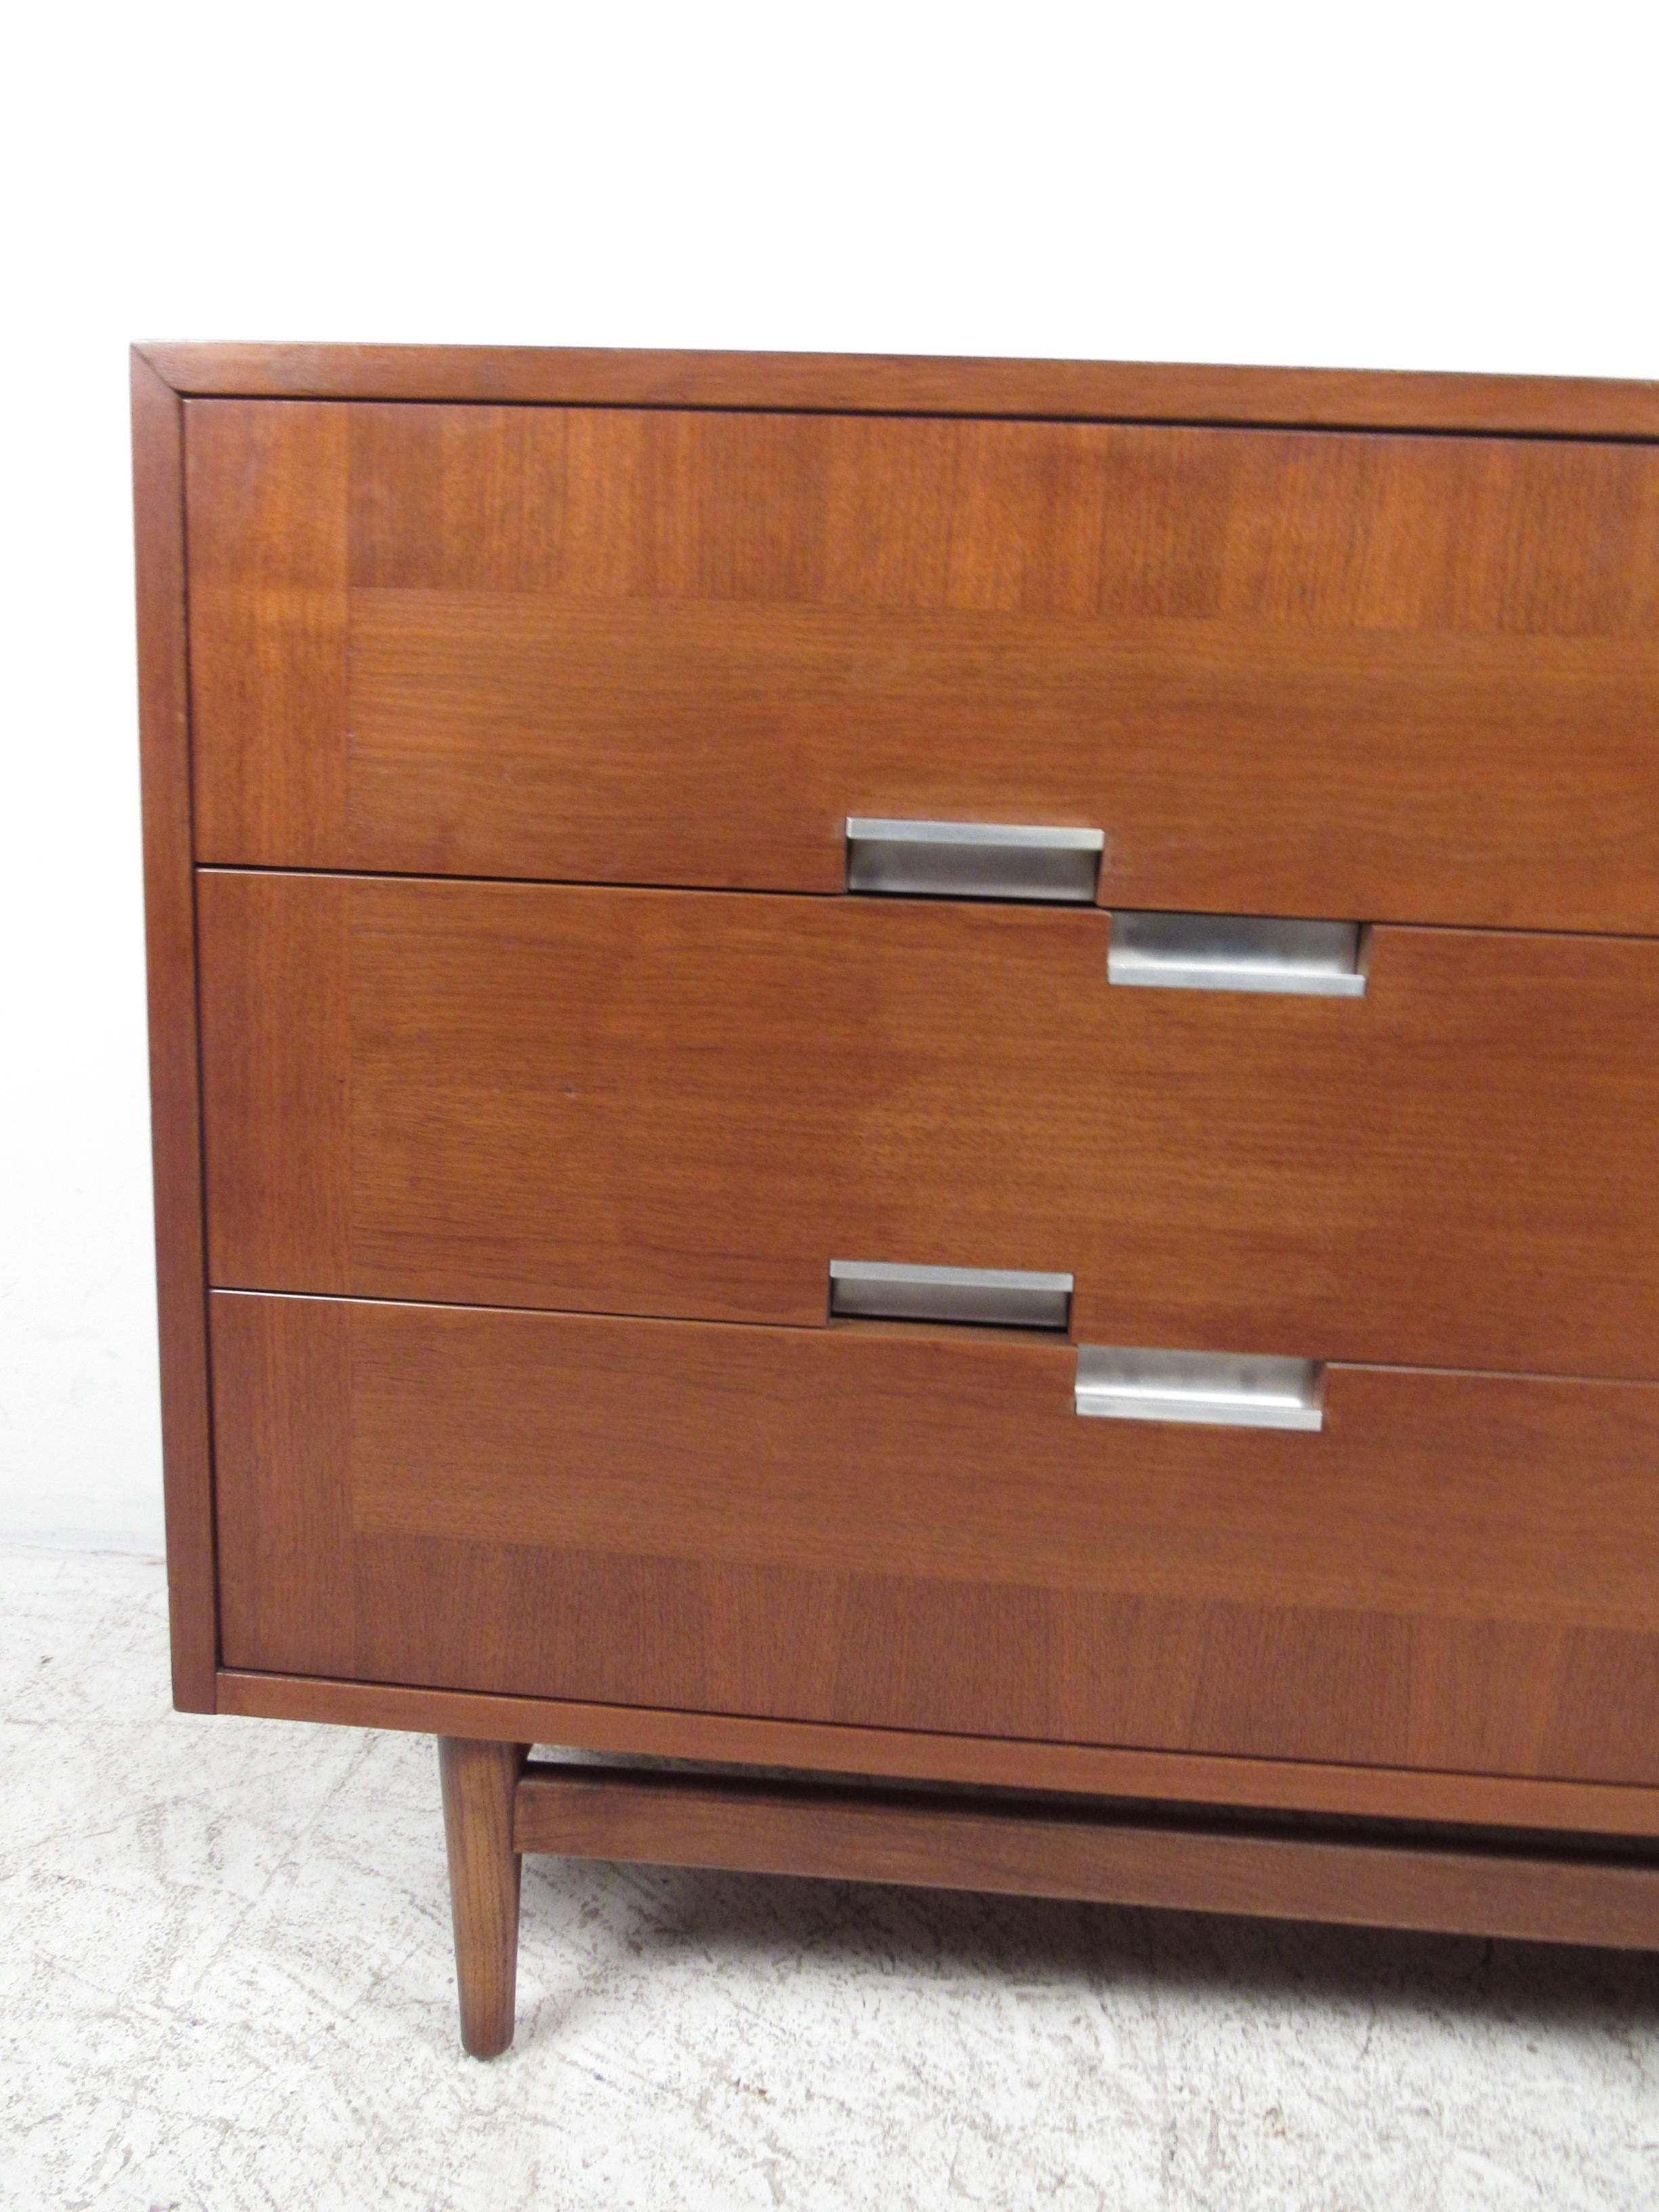 Late 20th Century American of Martinsville Cane Front Credenza